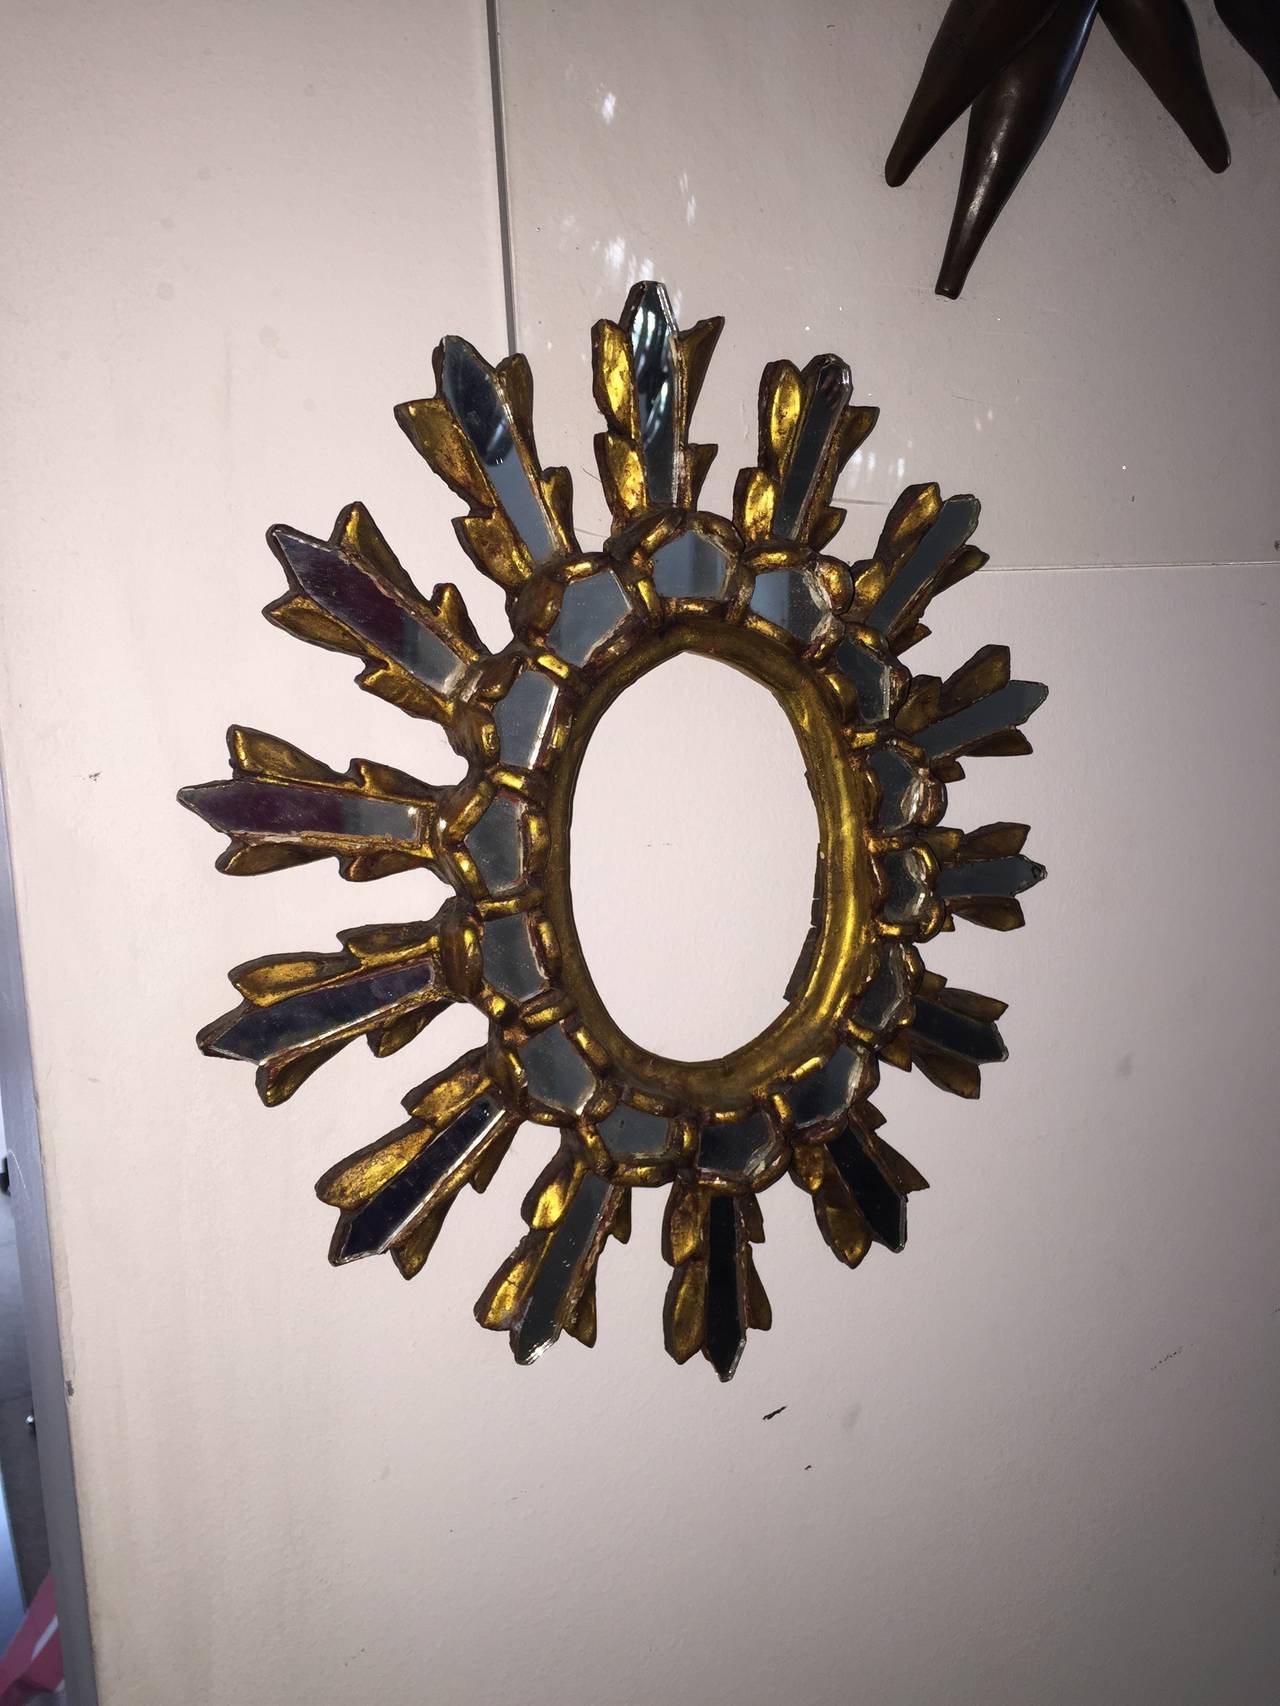 Exceptional Antique Sunburst wall hanging Mirror much in the style of Vautrine.  This unusual design is comprised of gold guilded wood and plaster in a sculptural sun shaped frame with embeded mirror pieces. It is very old and does not appear there